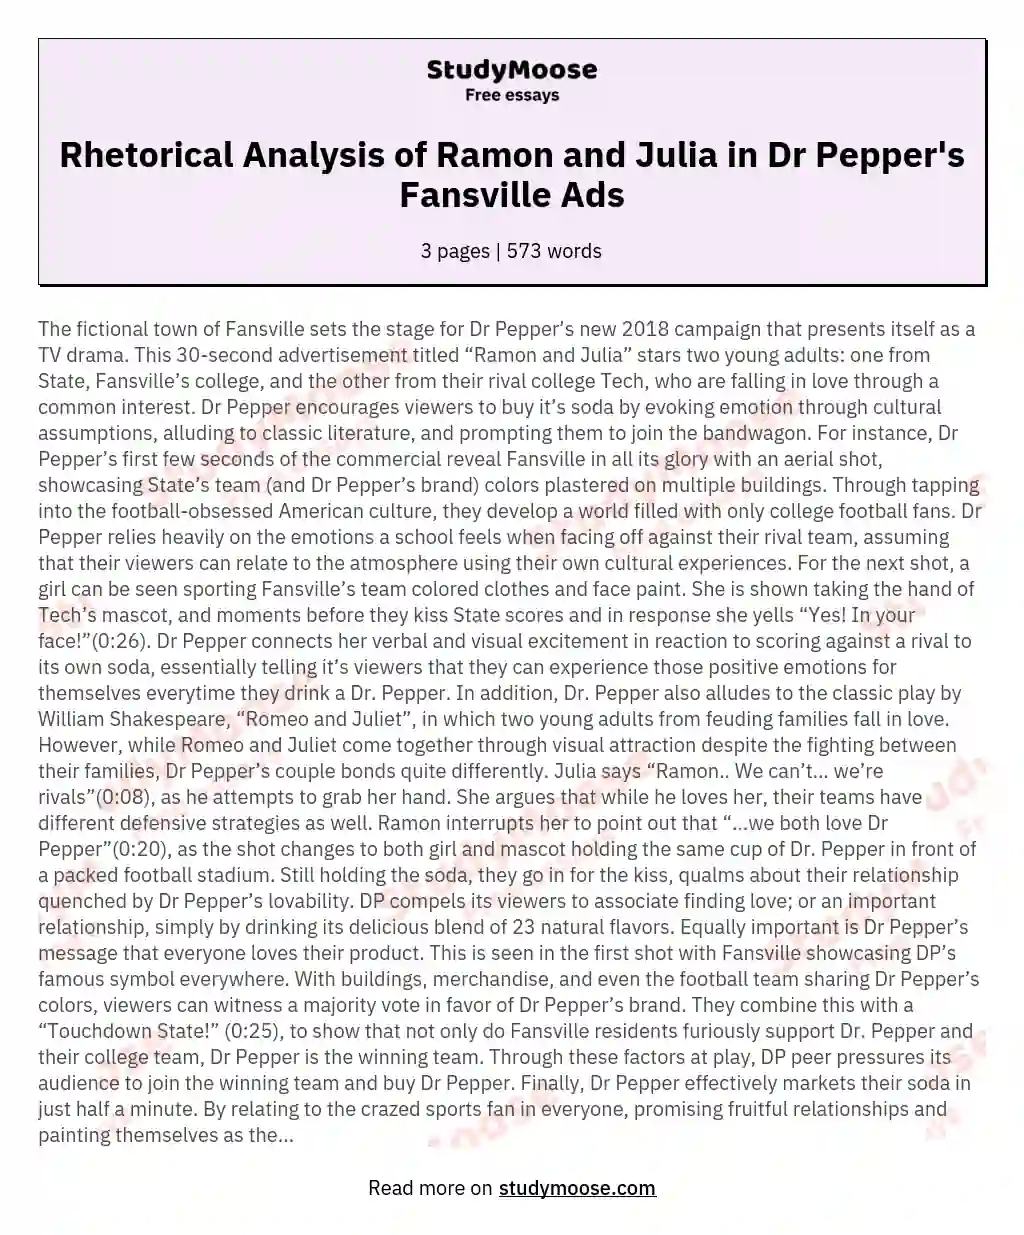 Rhetorical Analysis of Ramon and Julia in Dr Pepper's Fansville Ads essay